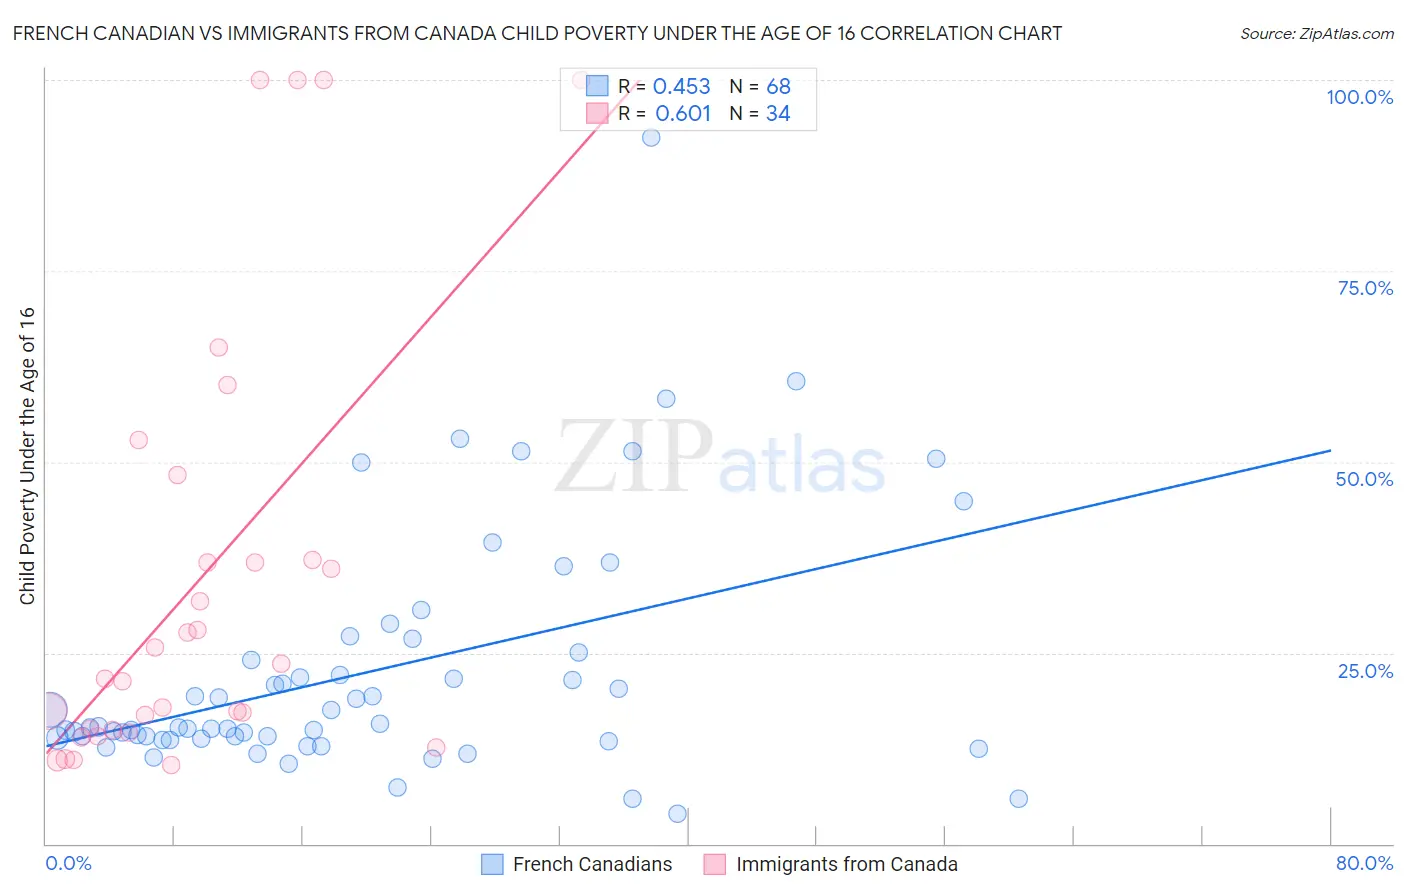 French Canadian vs Immigrants from Canada Child Poverty Under the Age of 16